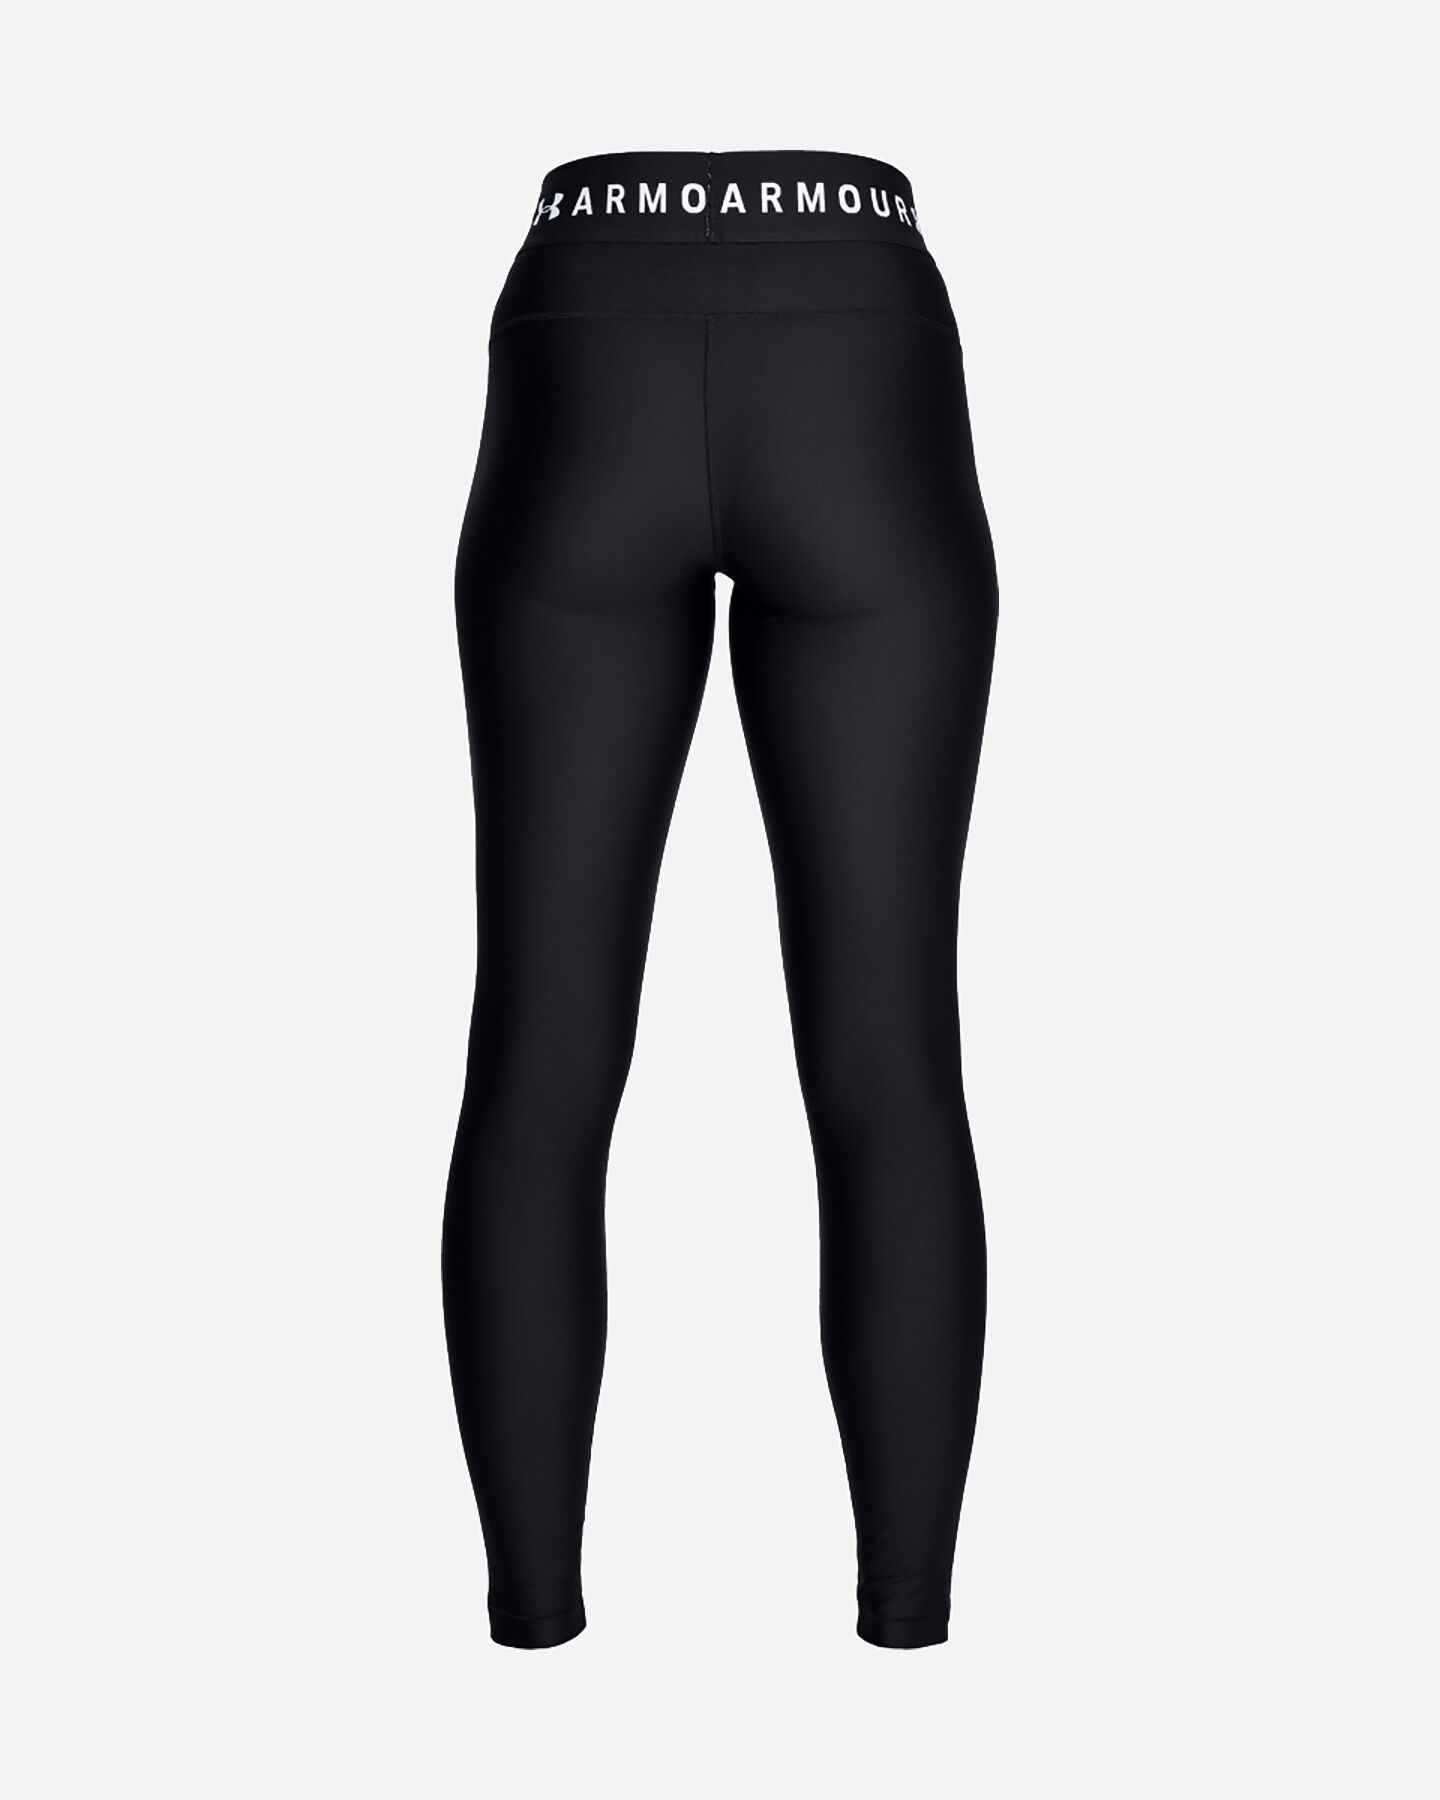  Leggings UNDER ARMOUR WB W S5168449|0001|XS scatto 3